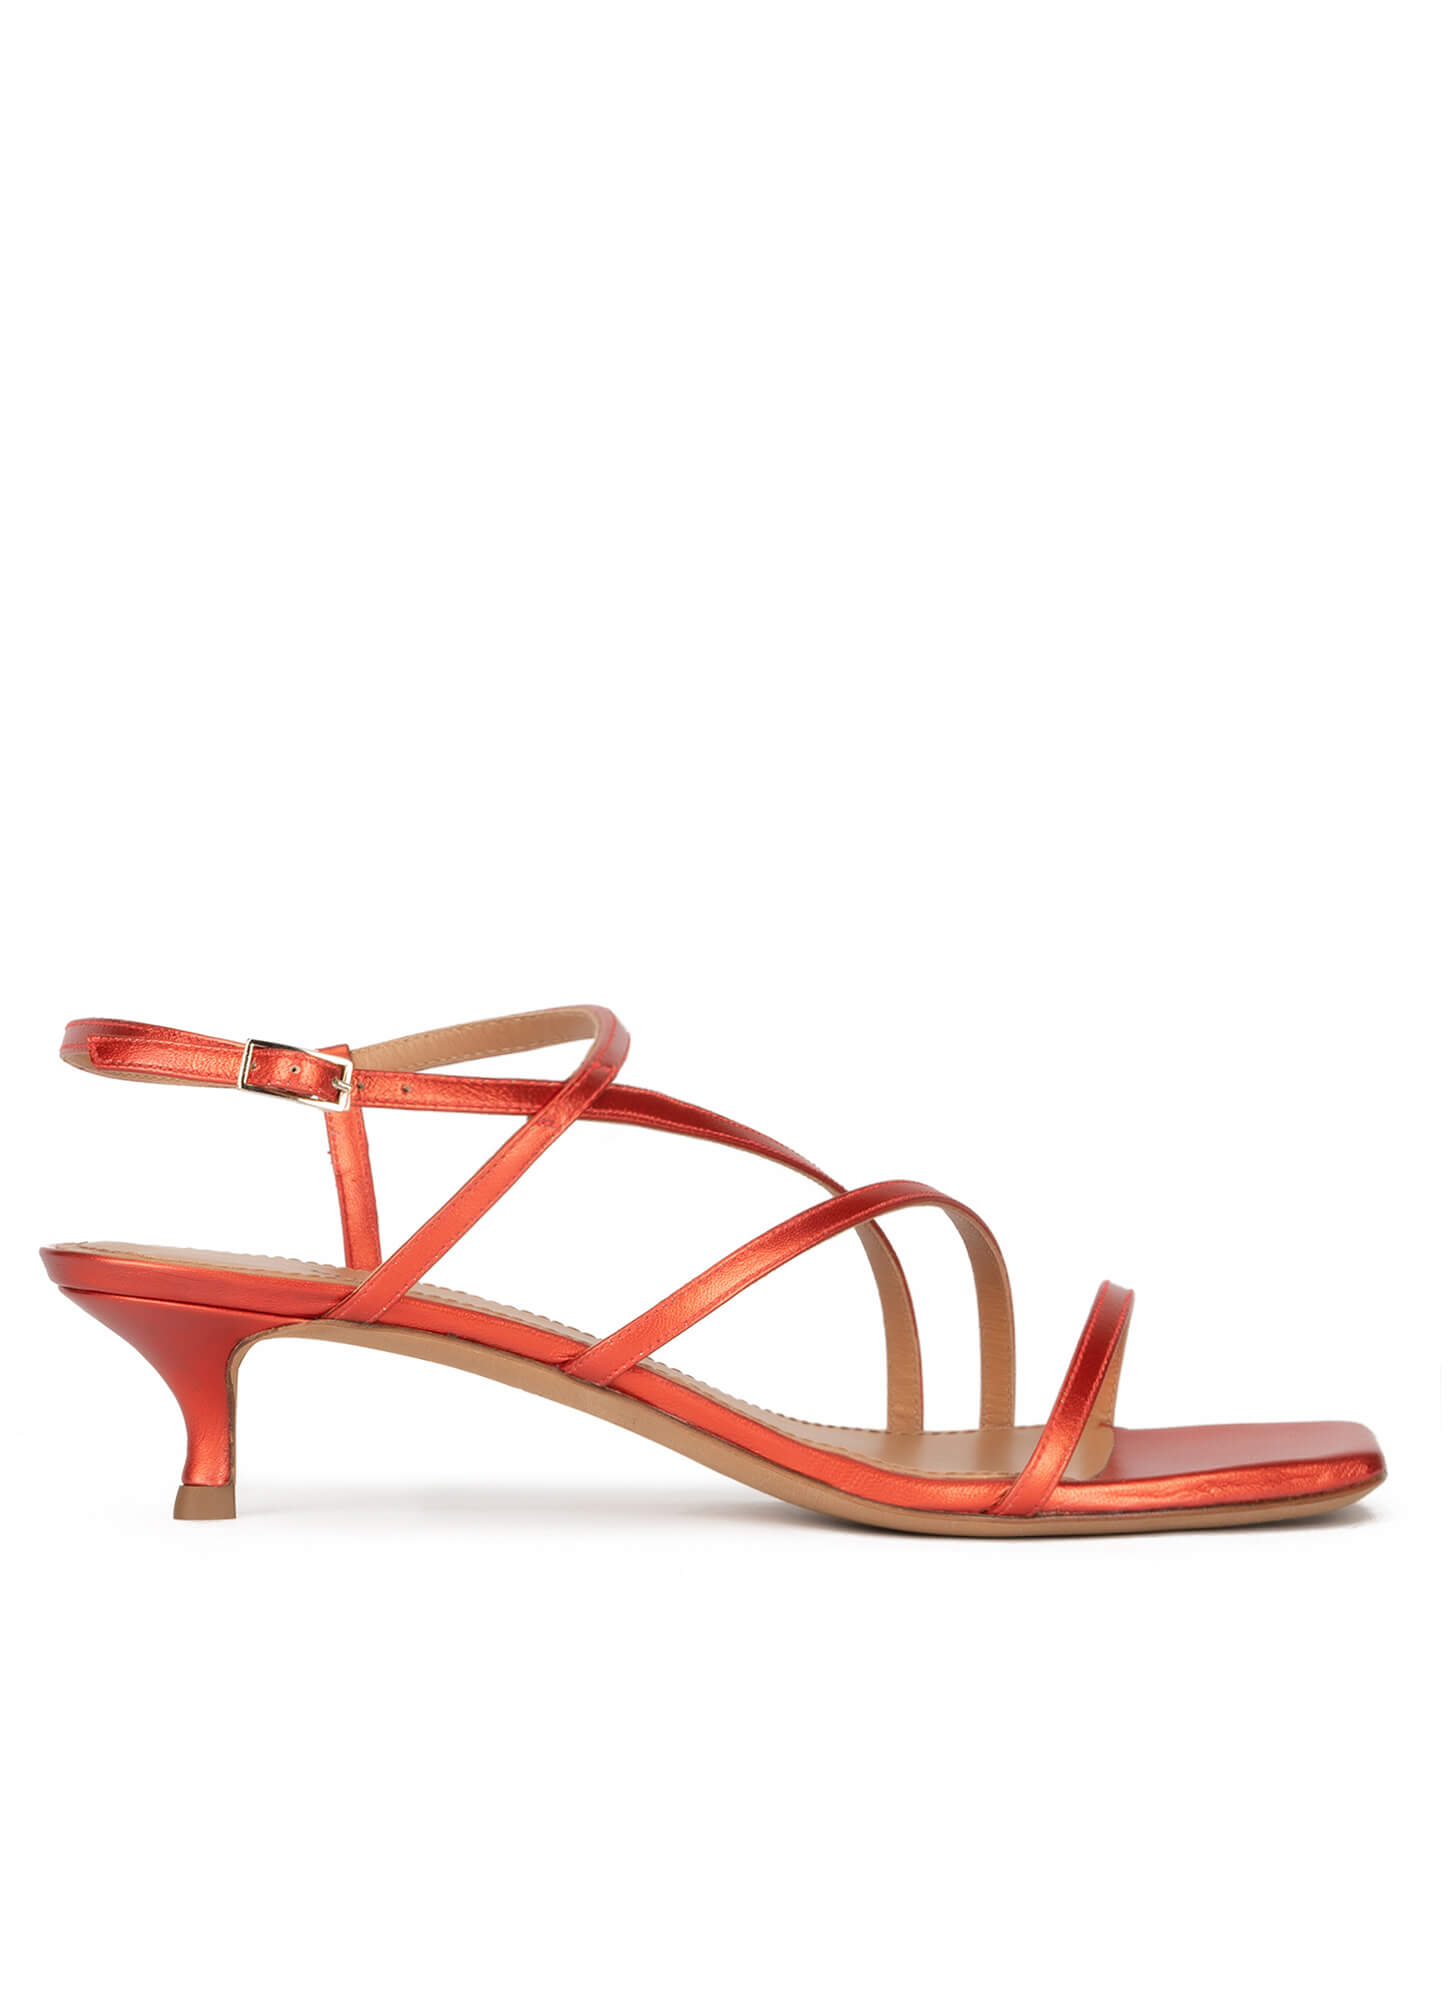 Coral strappy mid heel sandals in 